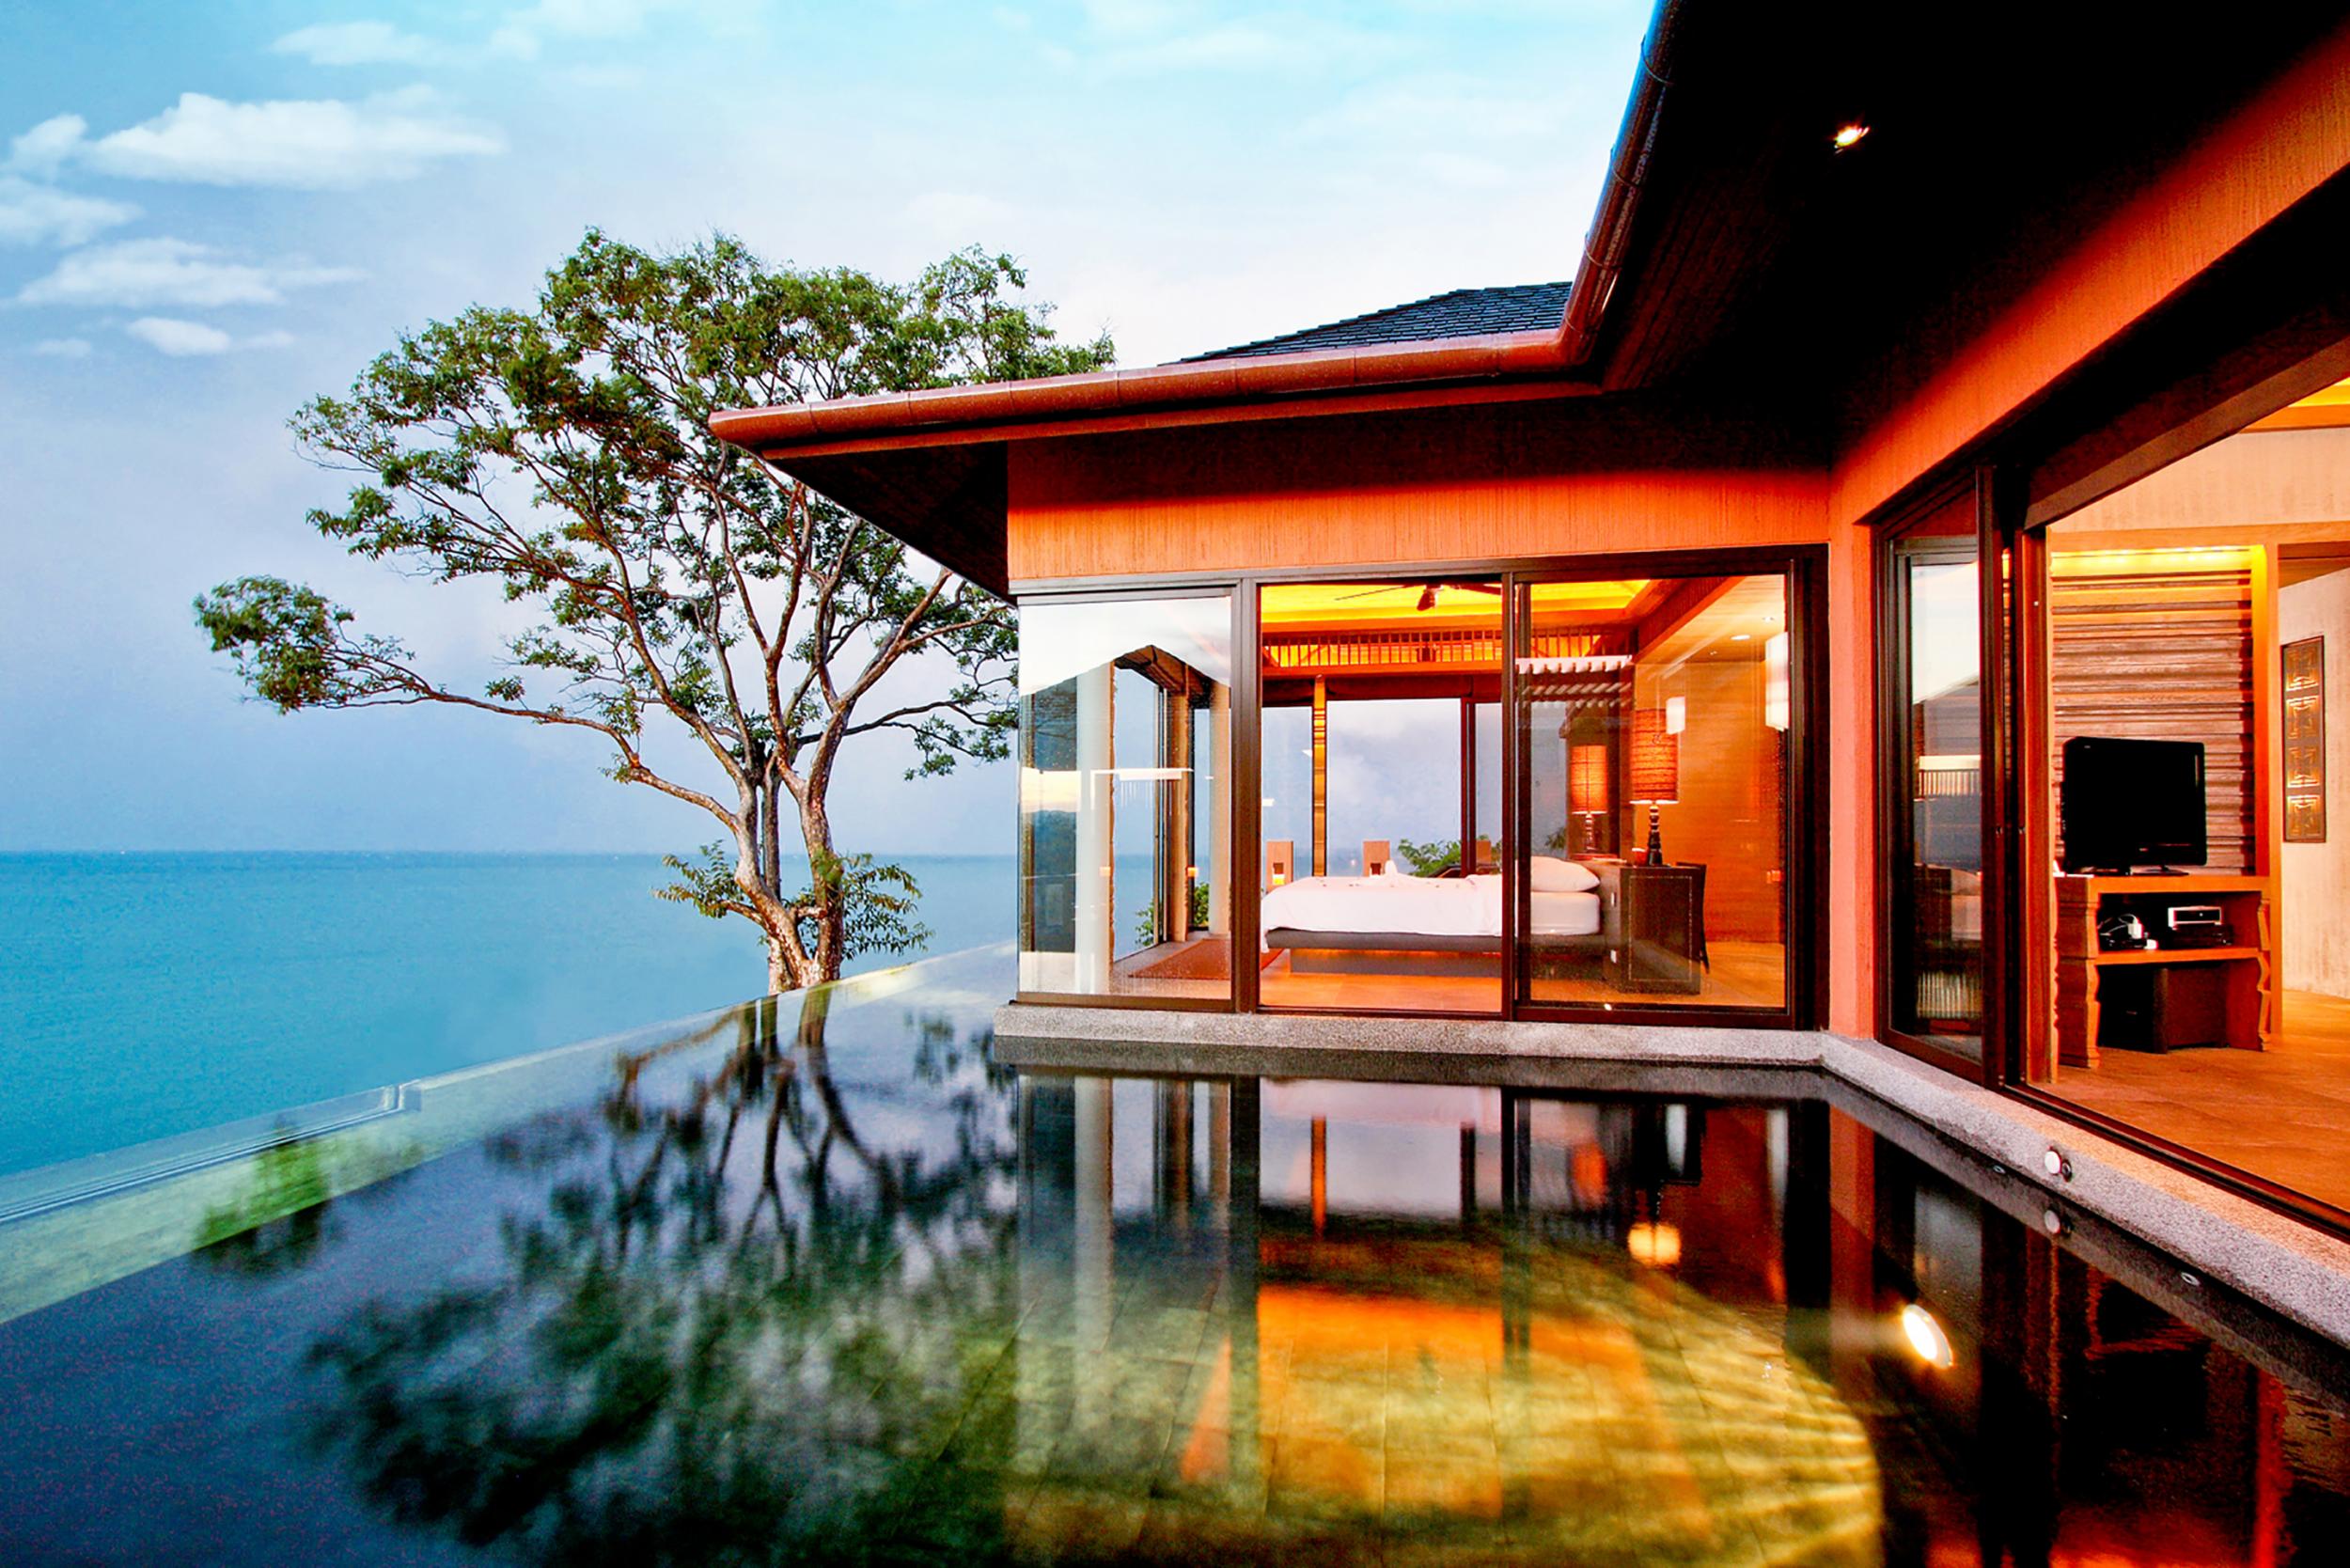 A luxury pool villa at Sri Panwa, complete with ocean view